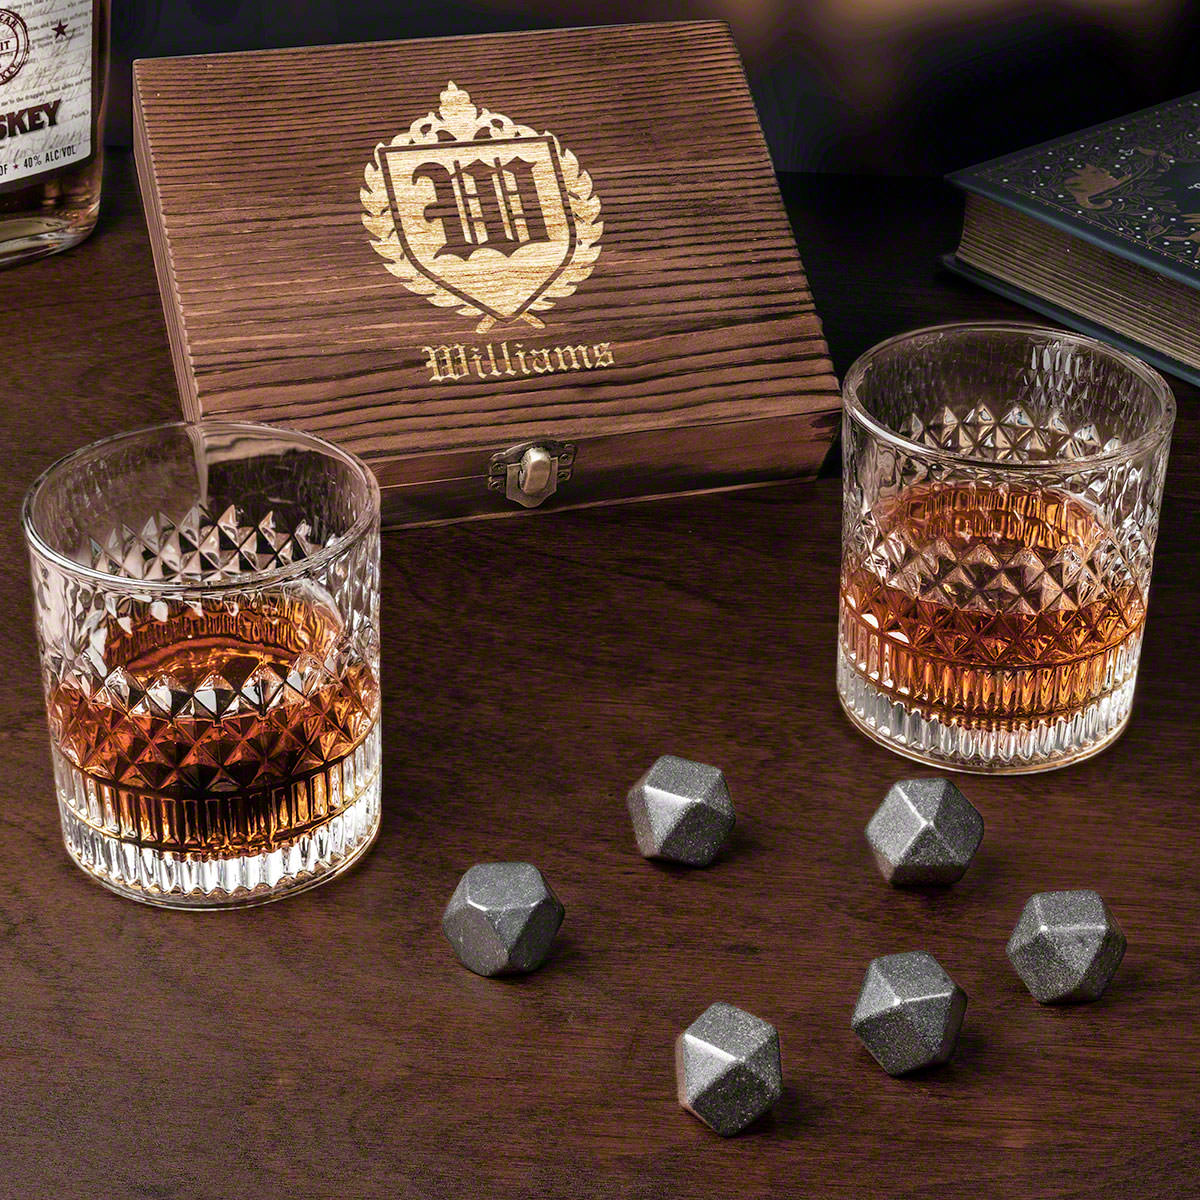 Truman Personalized Whiskey Gifts with Oxford Black Onyx Stones